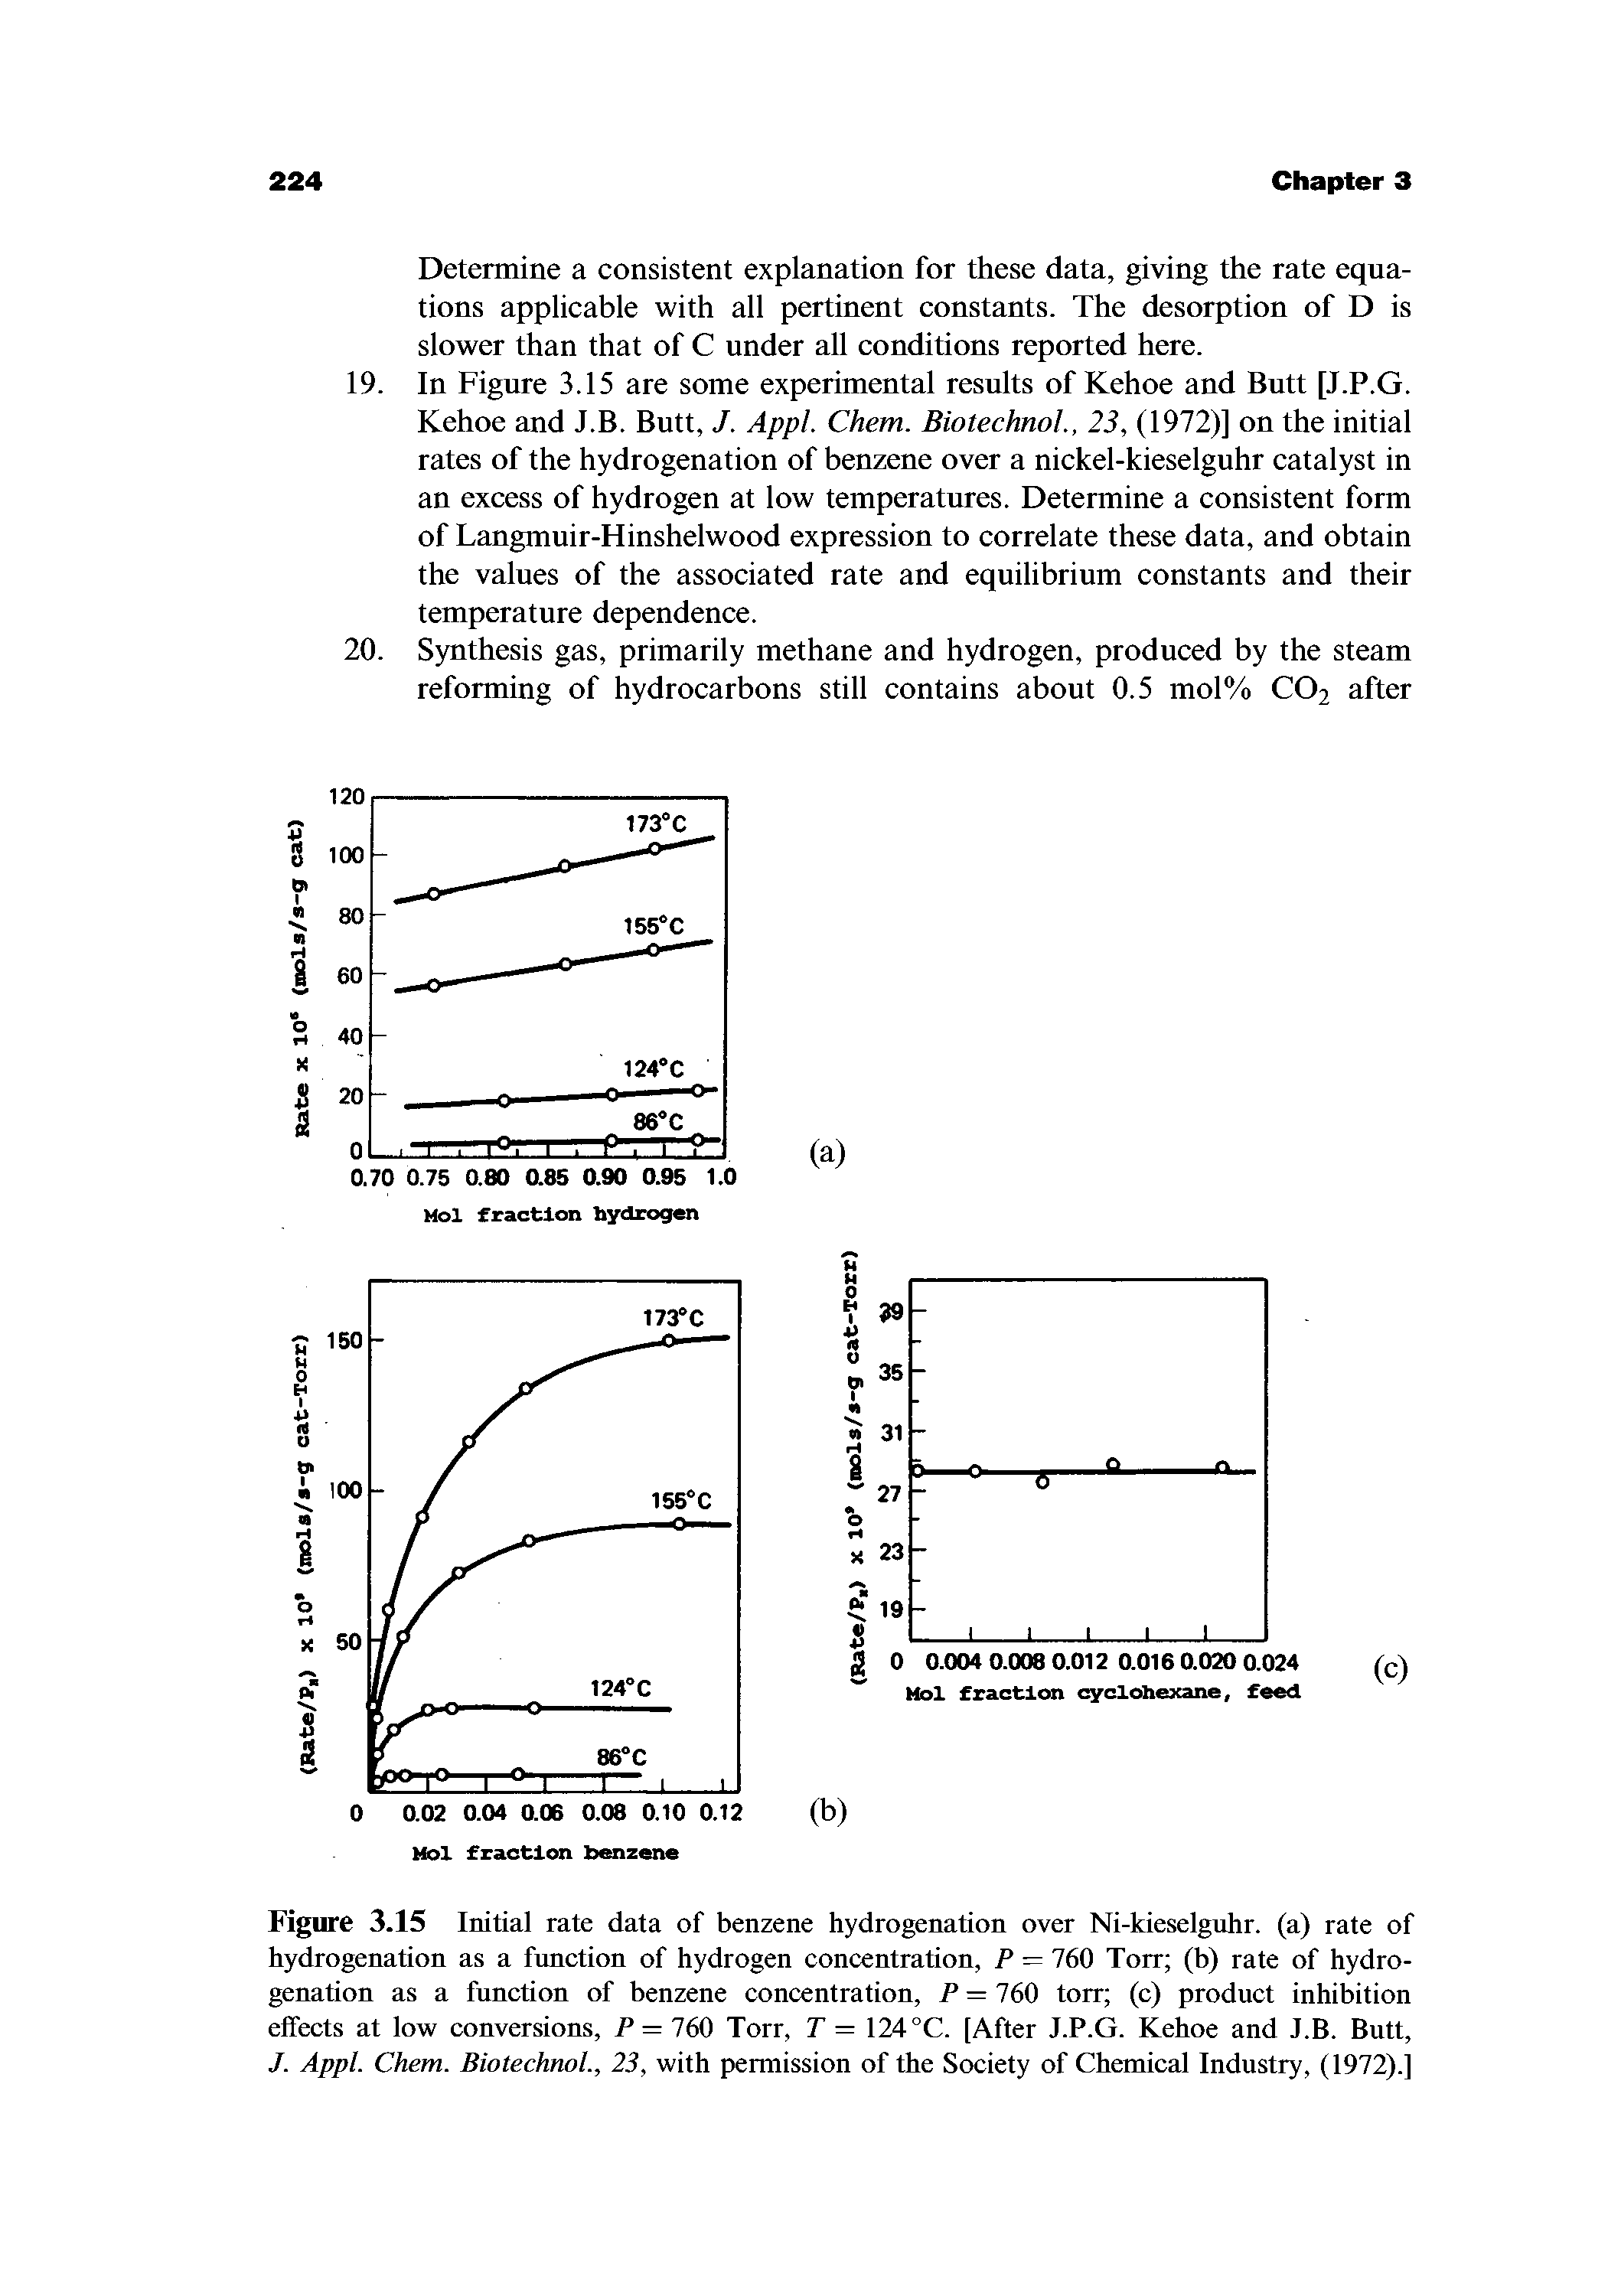 Figure 3.15 Initial rate data of benzene hydrogenation over Ni-kieselguhr. (a) rate of hydrogenation as a function of hydrogen concentration, P = 760 Torr (b) rate of hydrogenation as a function of benzene concentration, P = 760 torr (c) product inhibition effects at low conversions, P = 760 Torr, T = 124 °C. [After J.P.G. Kehoe and J.B. Butt, J. Appl. Chem. BiotechnoL, 23, with permission of the Society of Chemical Industry, (1972).]...